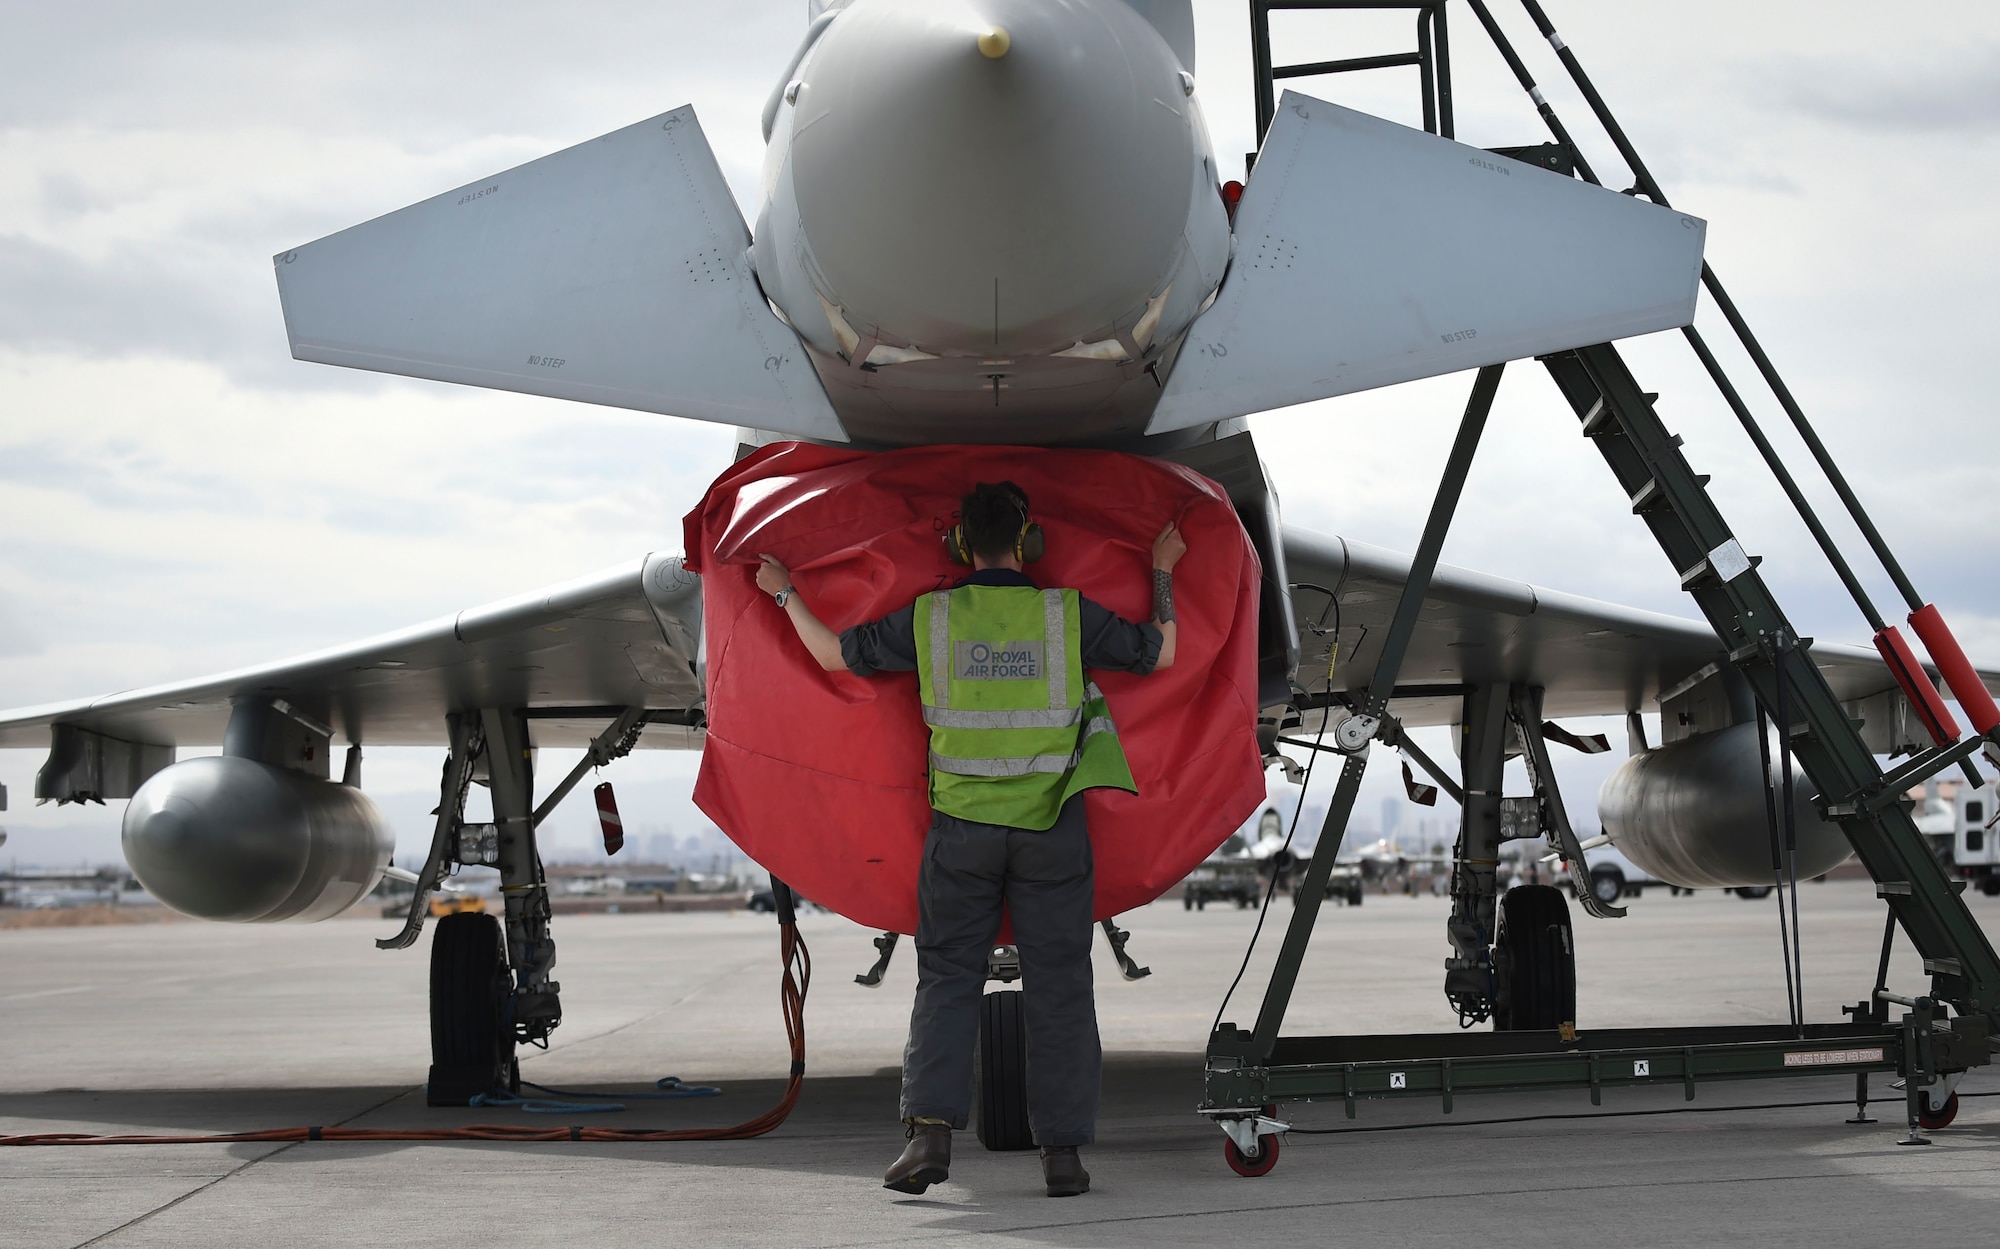 A Royal Air Force Eurofighter Typhoon maintainer uncovers a Typhoon’s intake during Red Flag 17-1 at Nellis Air Force Base, Nev., Feb 7, 2016. The Typhoon is an agile multi-role fighter that has worked with the F-22 Raptor in contingency and training operations, and is now training with both the Raptor and F-35A Lighting II. (U.S Air Force photo by Staff Sgt. Natasha Stannard)